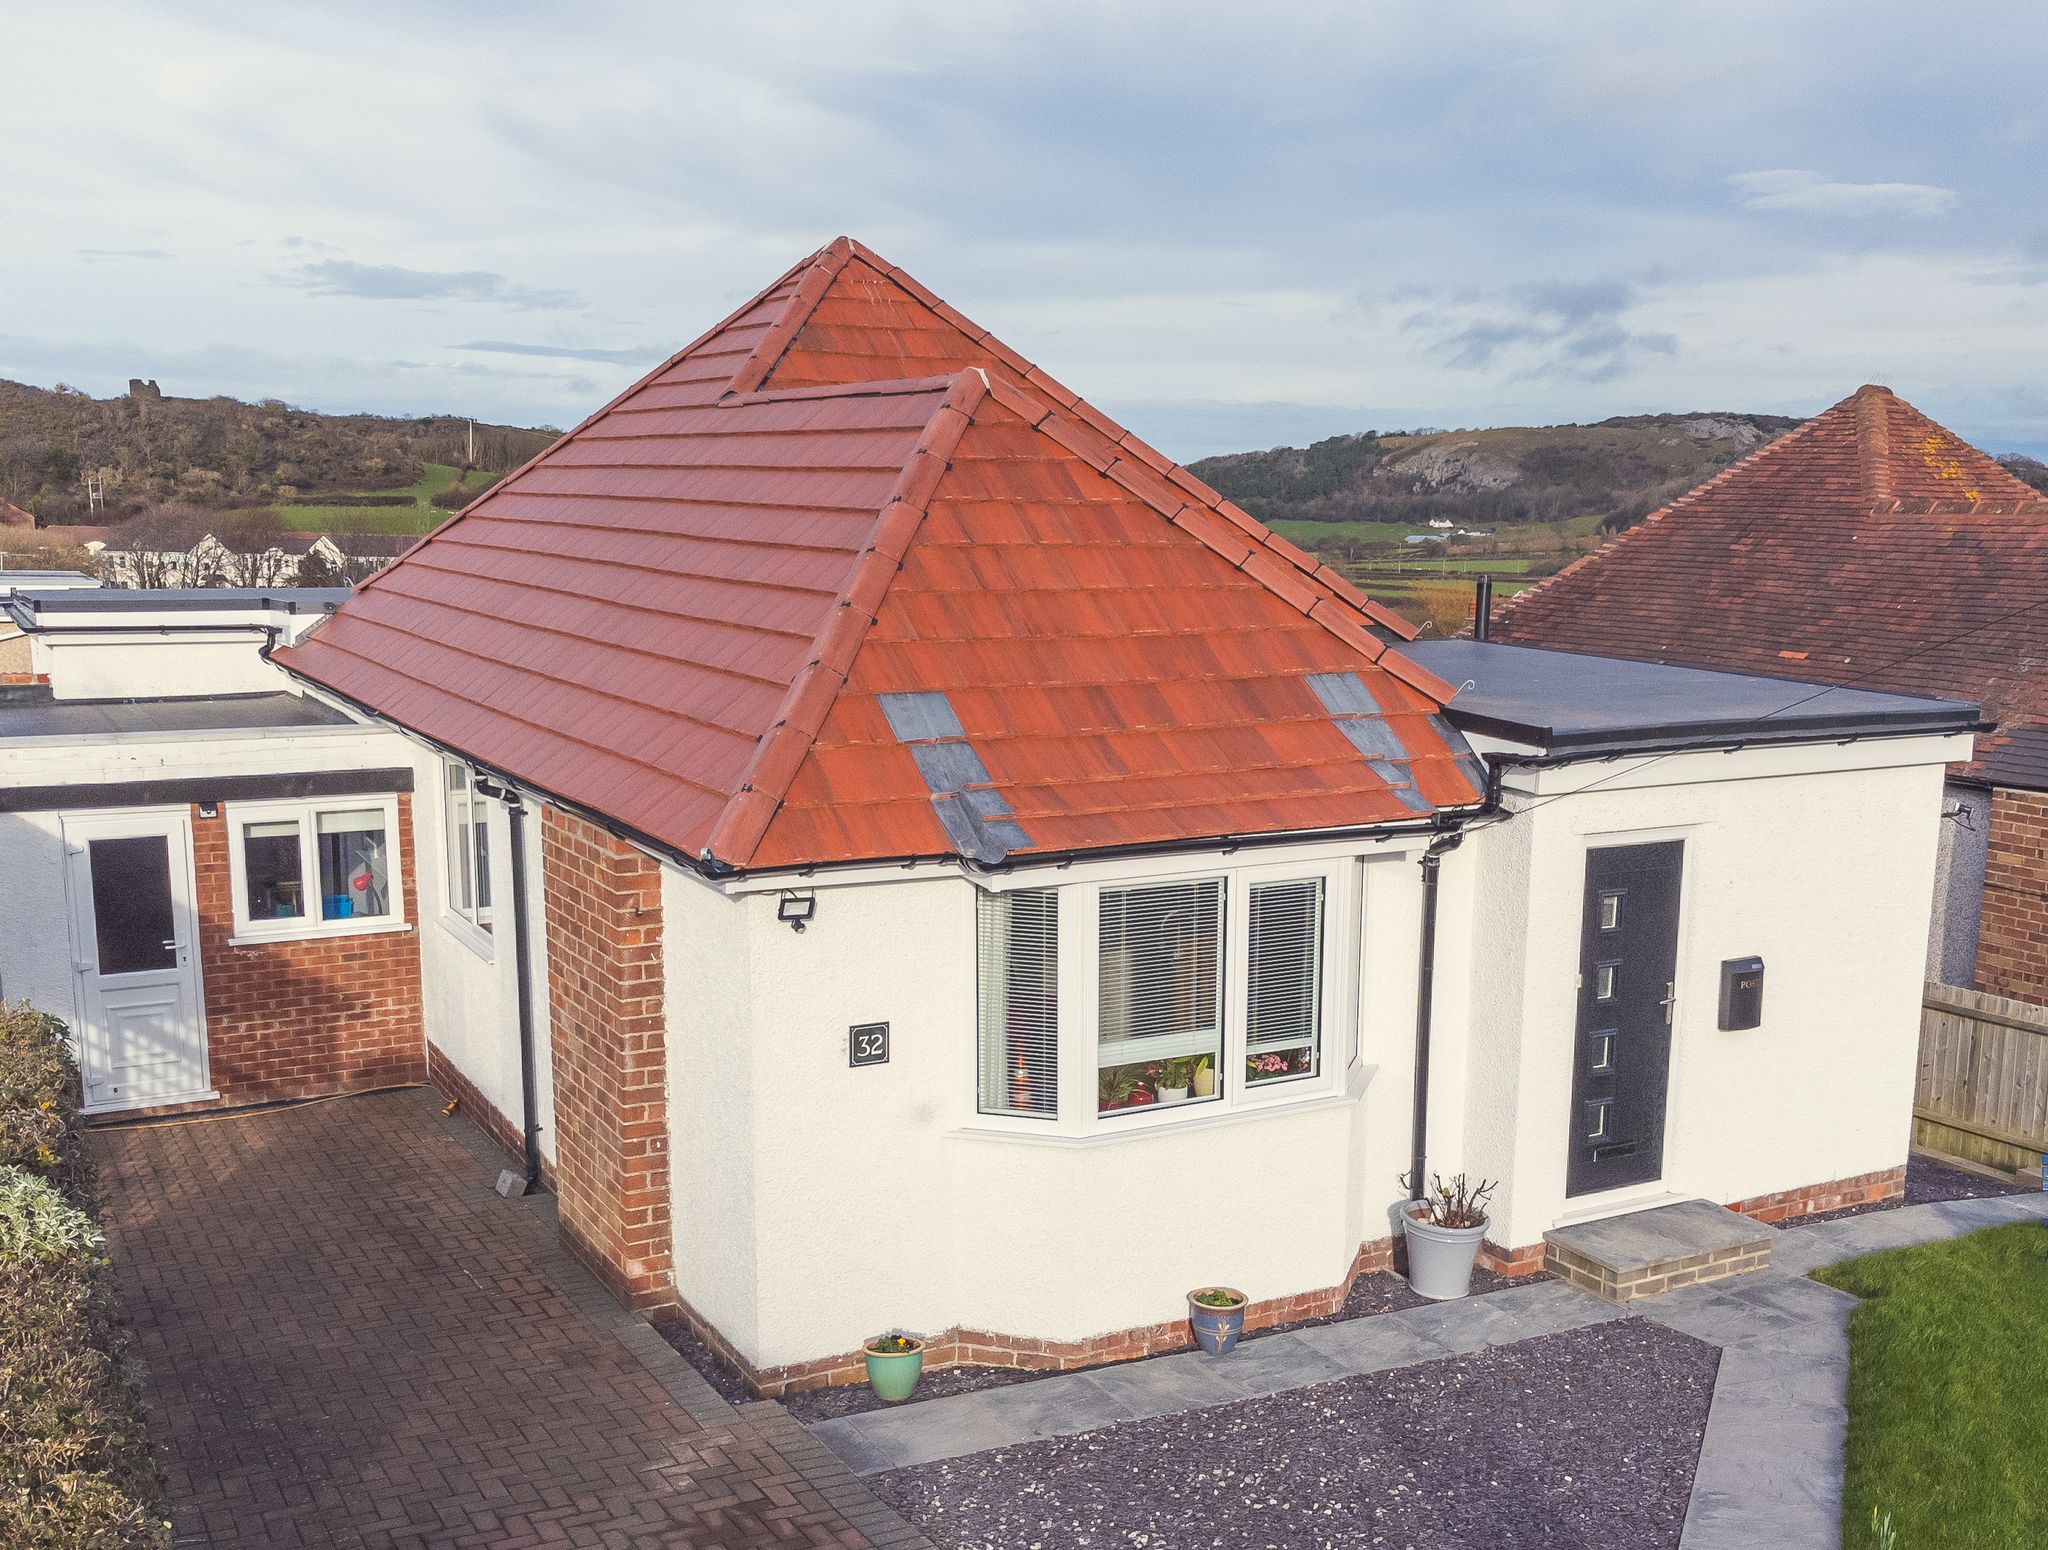 Tile Roof Contractors Queensferry, CH5 - DD Roofing